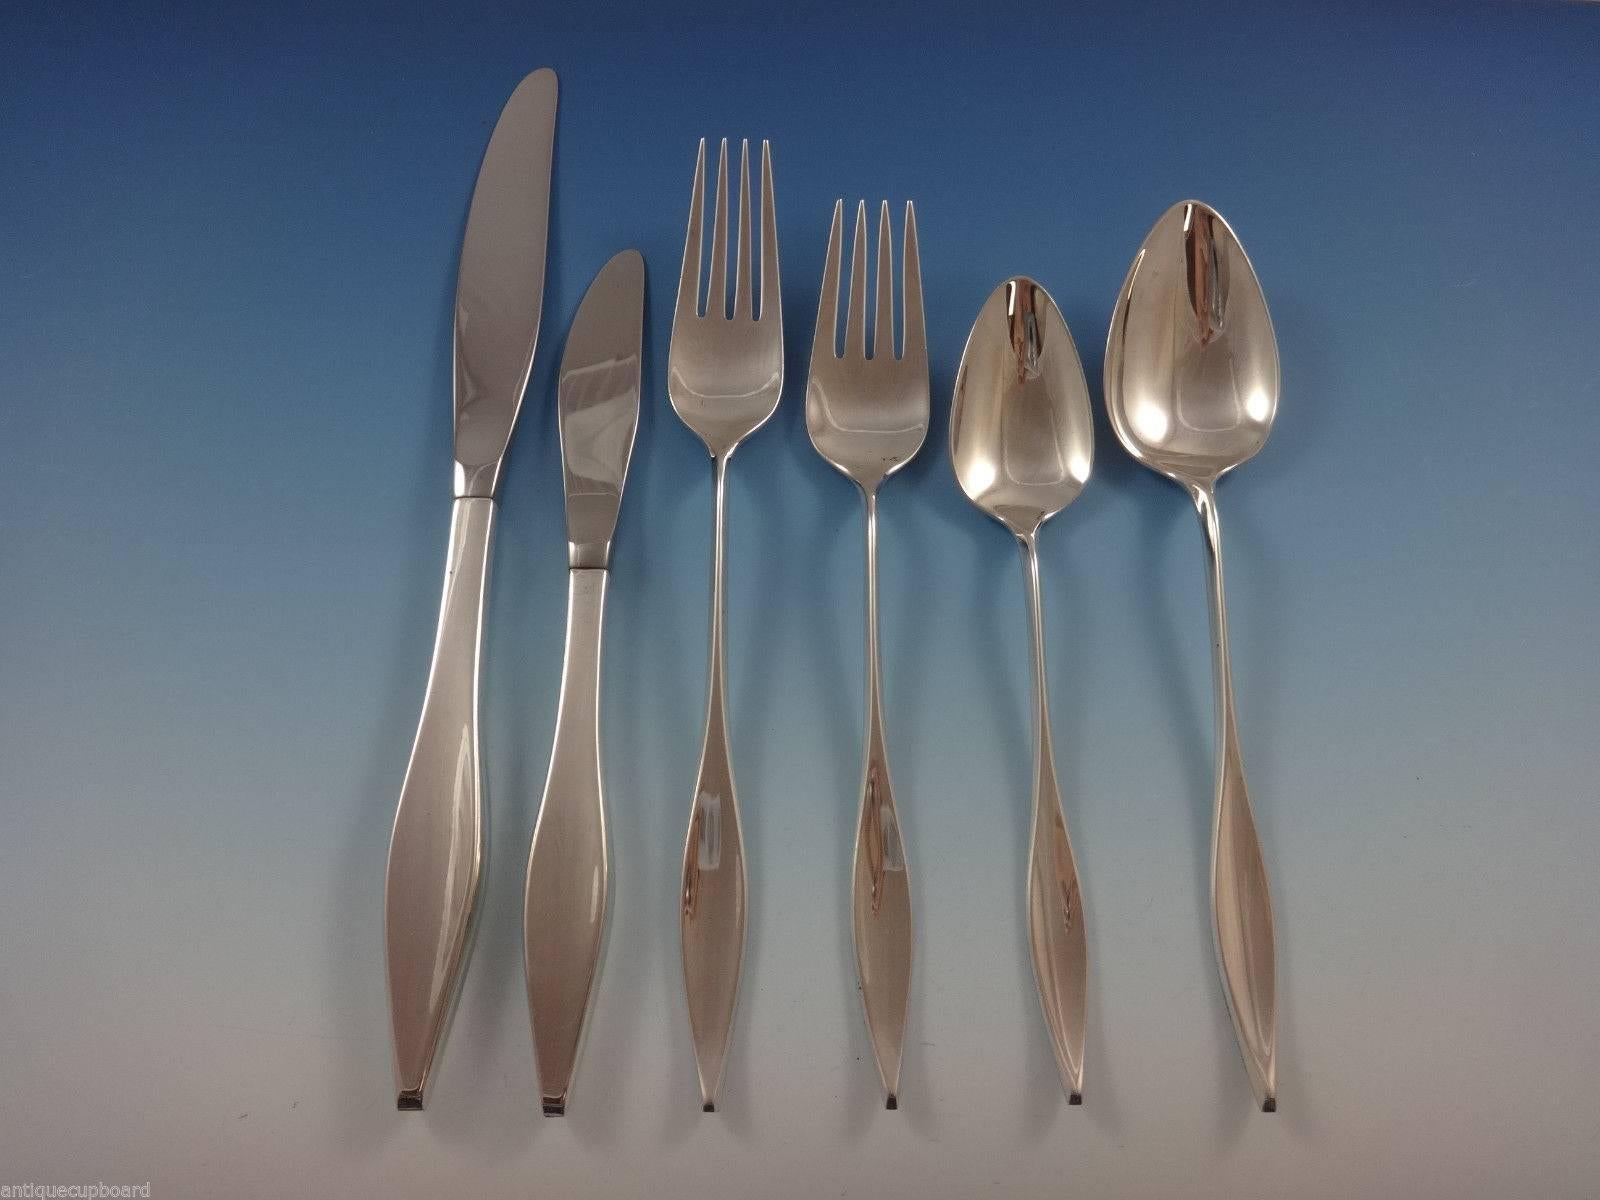 Mid-Century Modern Lark by Reed & Barton sterling silver Flatware set - 76 Pieces. Designed by John Prip. This set includes:

12 knives, 9